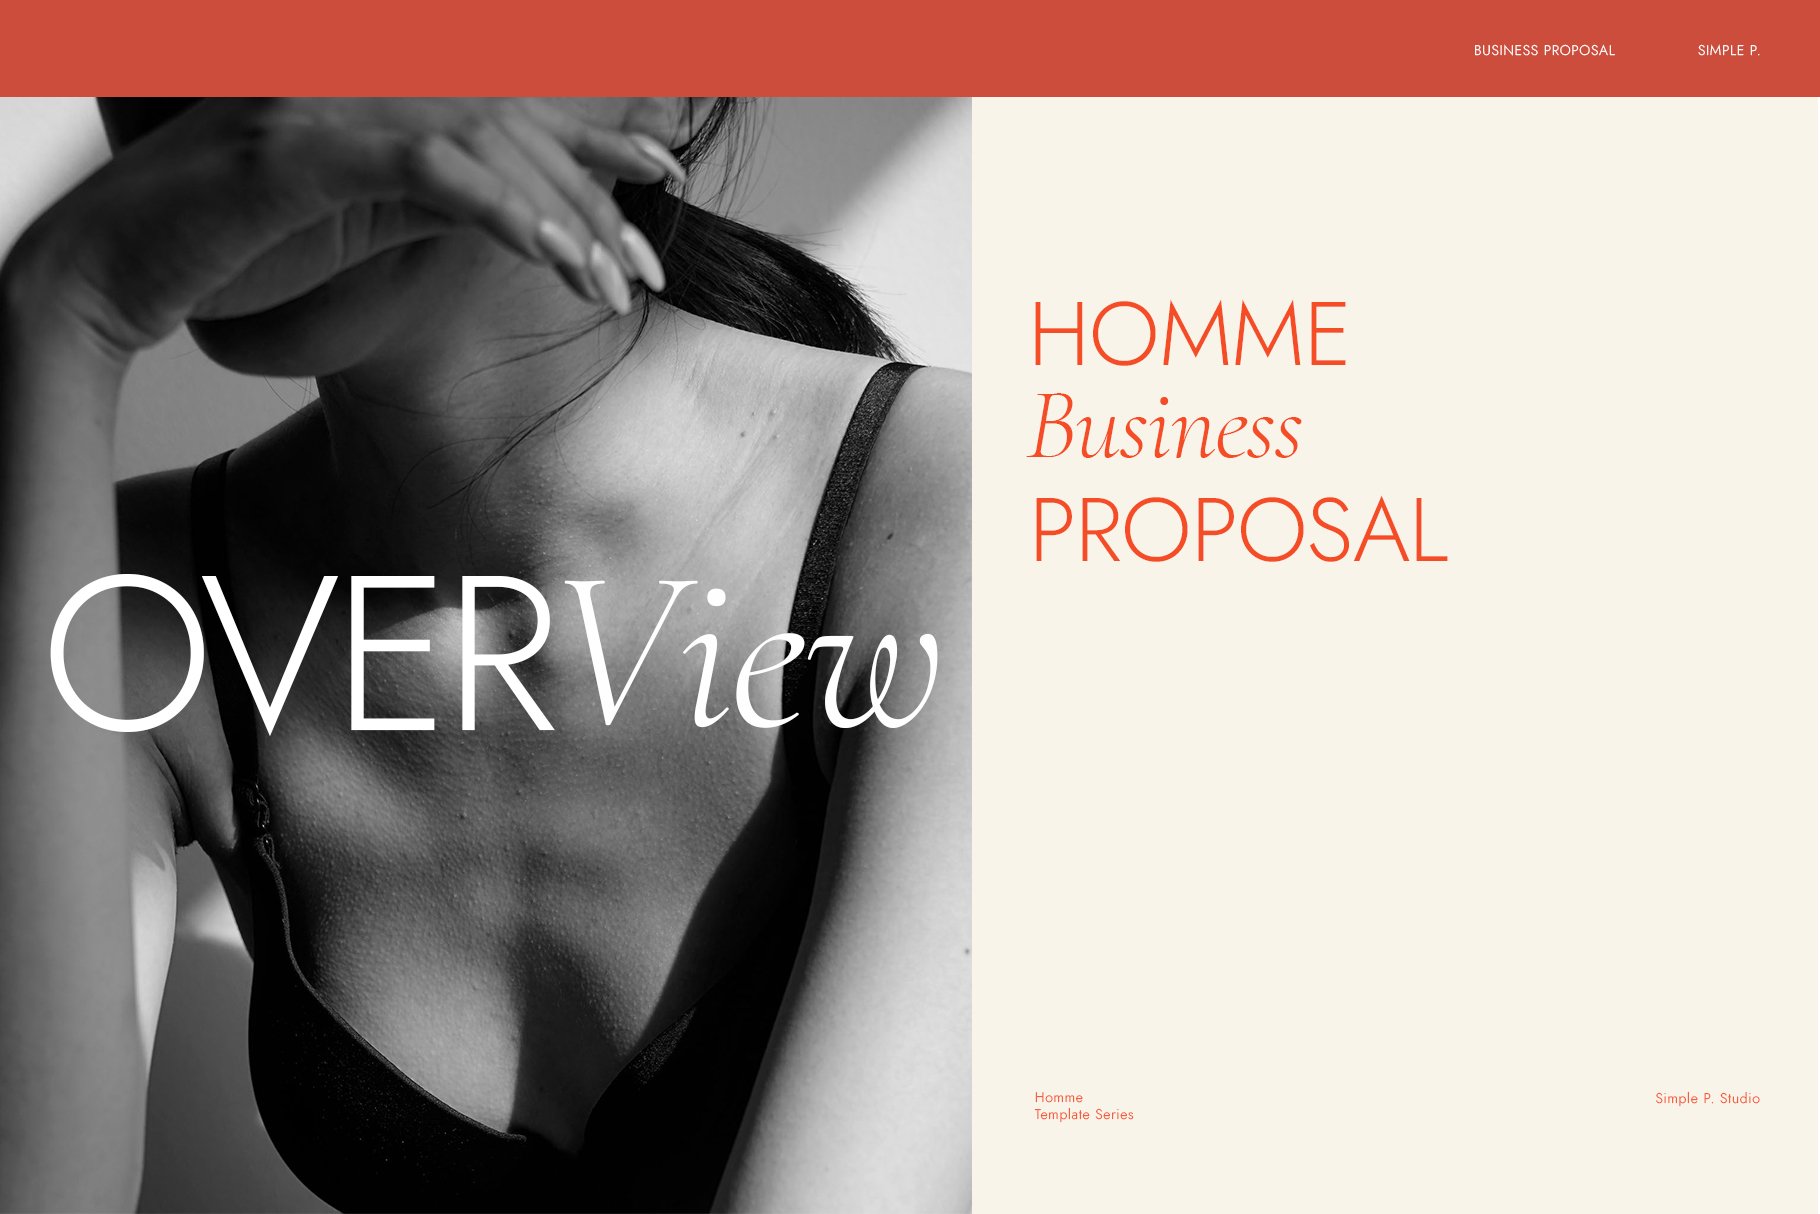 HOMME Business Proposal preview image.